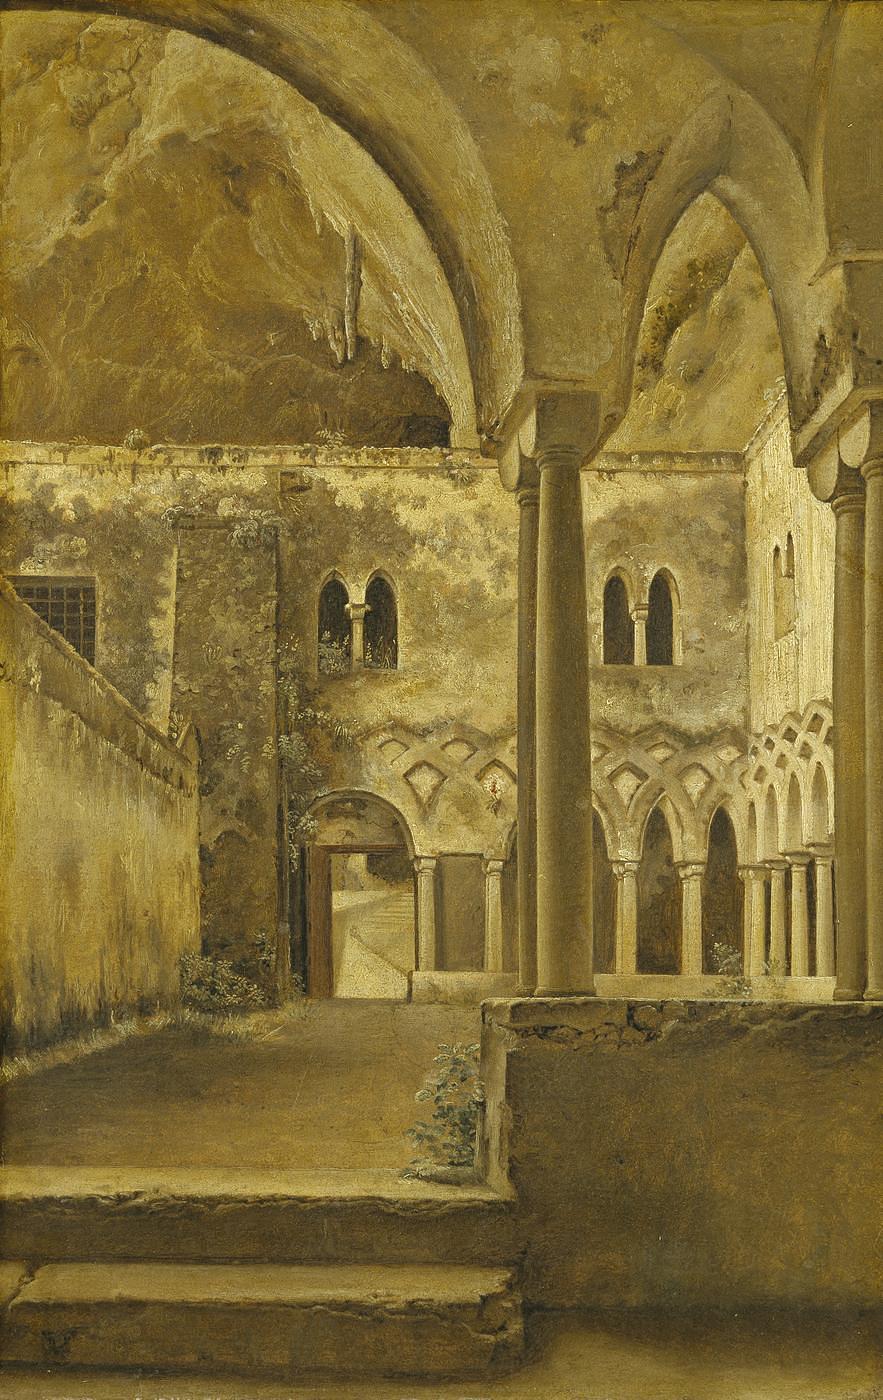 The Courtyard of the Franciscan Monastery by Amalfi, B271